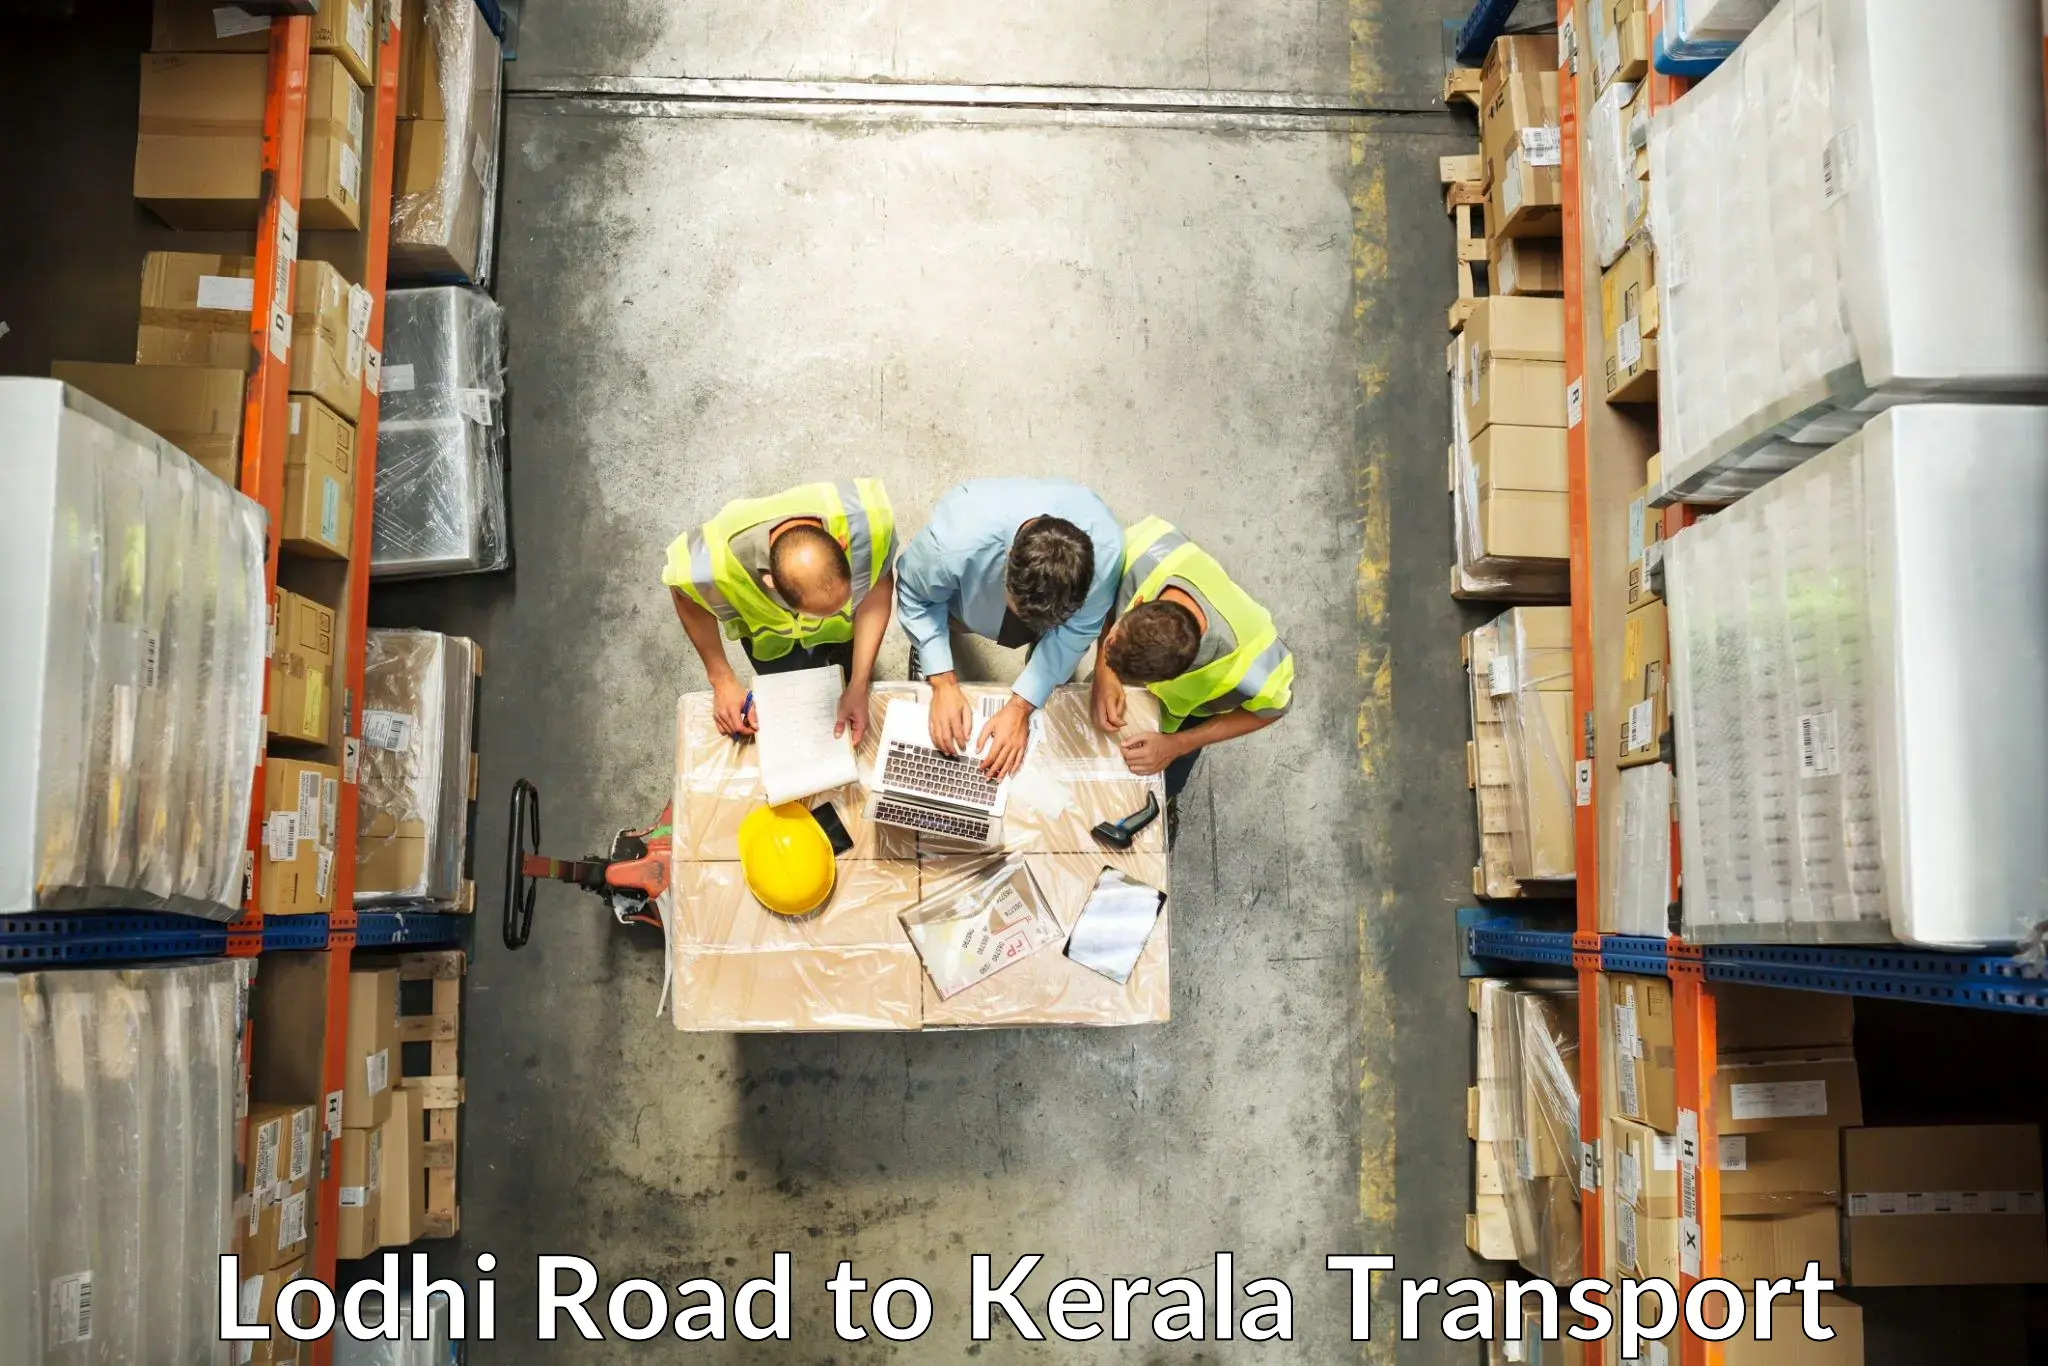 Daily parcel service transport Lodhi Road to Kallikkad